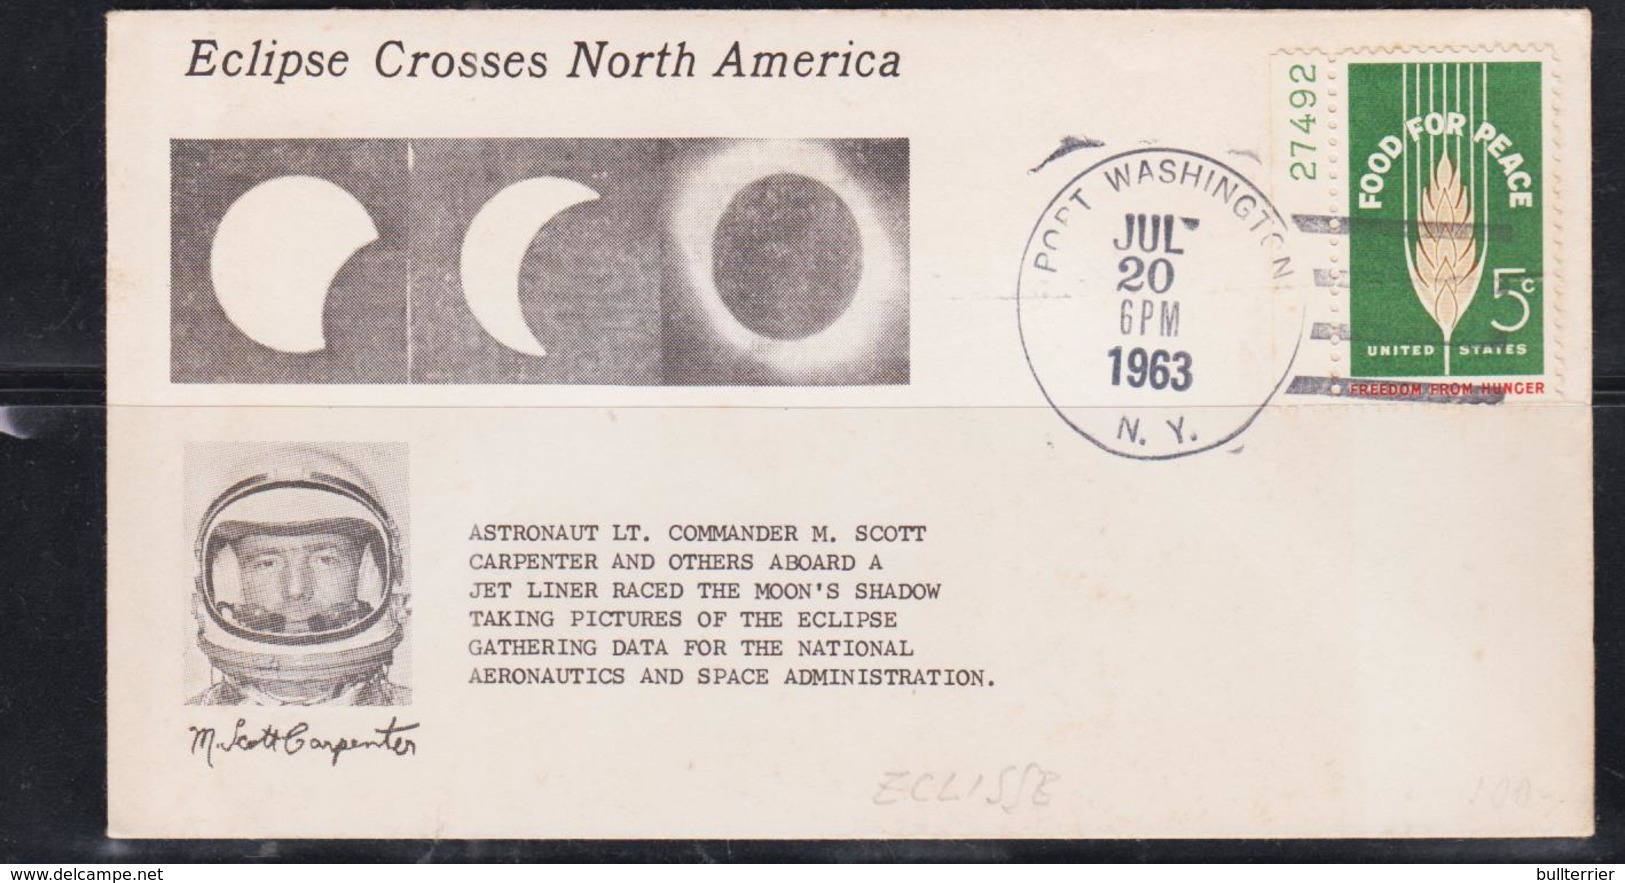 SPACE  - USA-  1963 - MOON ECLIPSE  COVER WITH PORT WASHINGTON  POSTMARK  JUL 20 1963 - United States